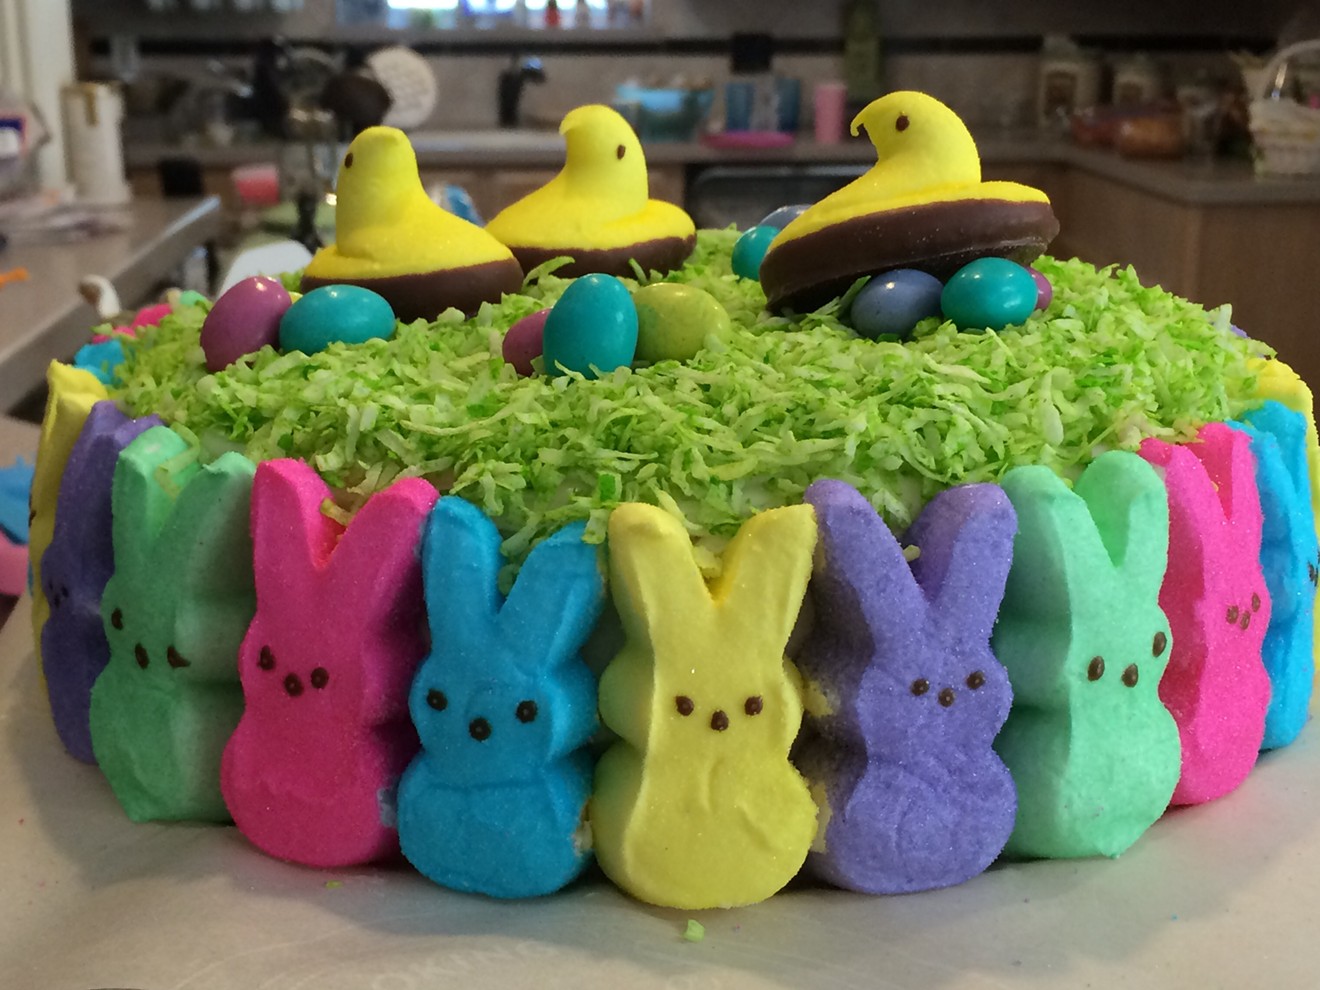 All my Peeps are in the house!